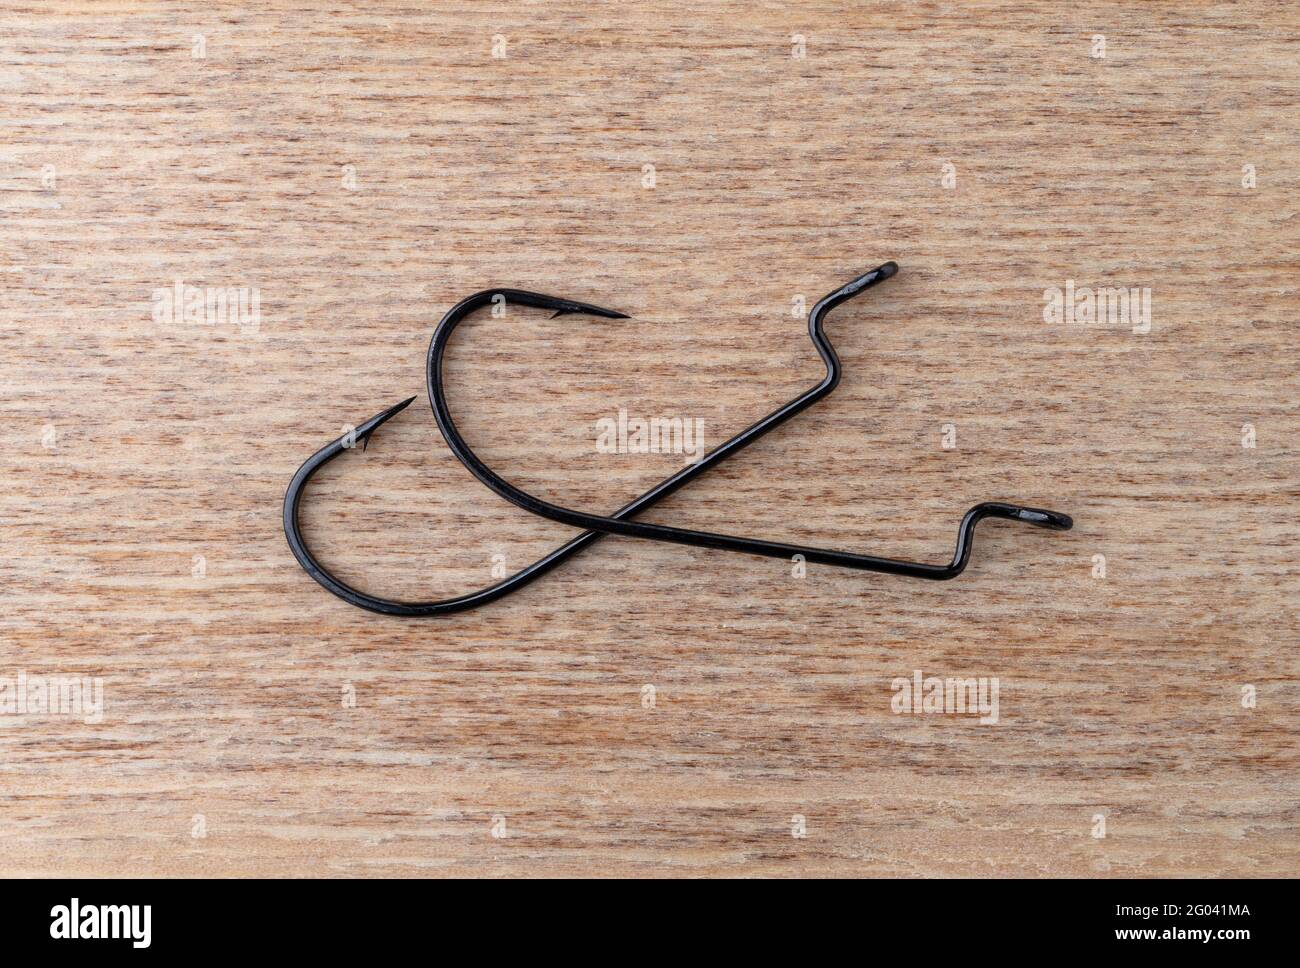 Top view of two offset plastic worm bait hooks on a wood